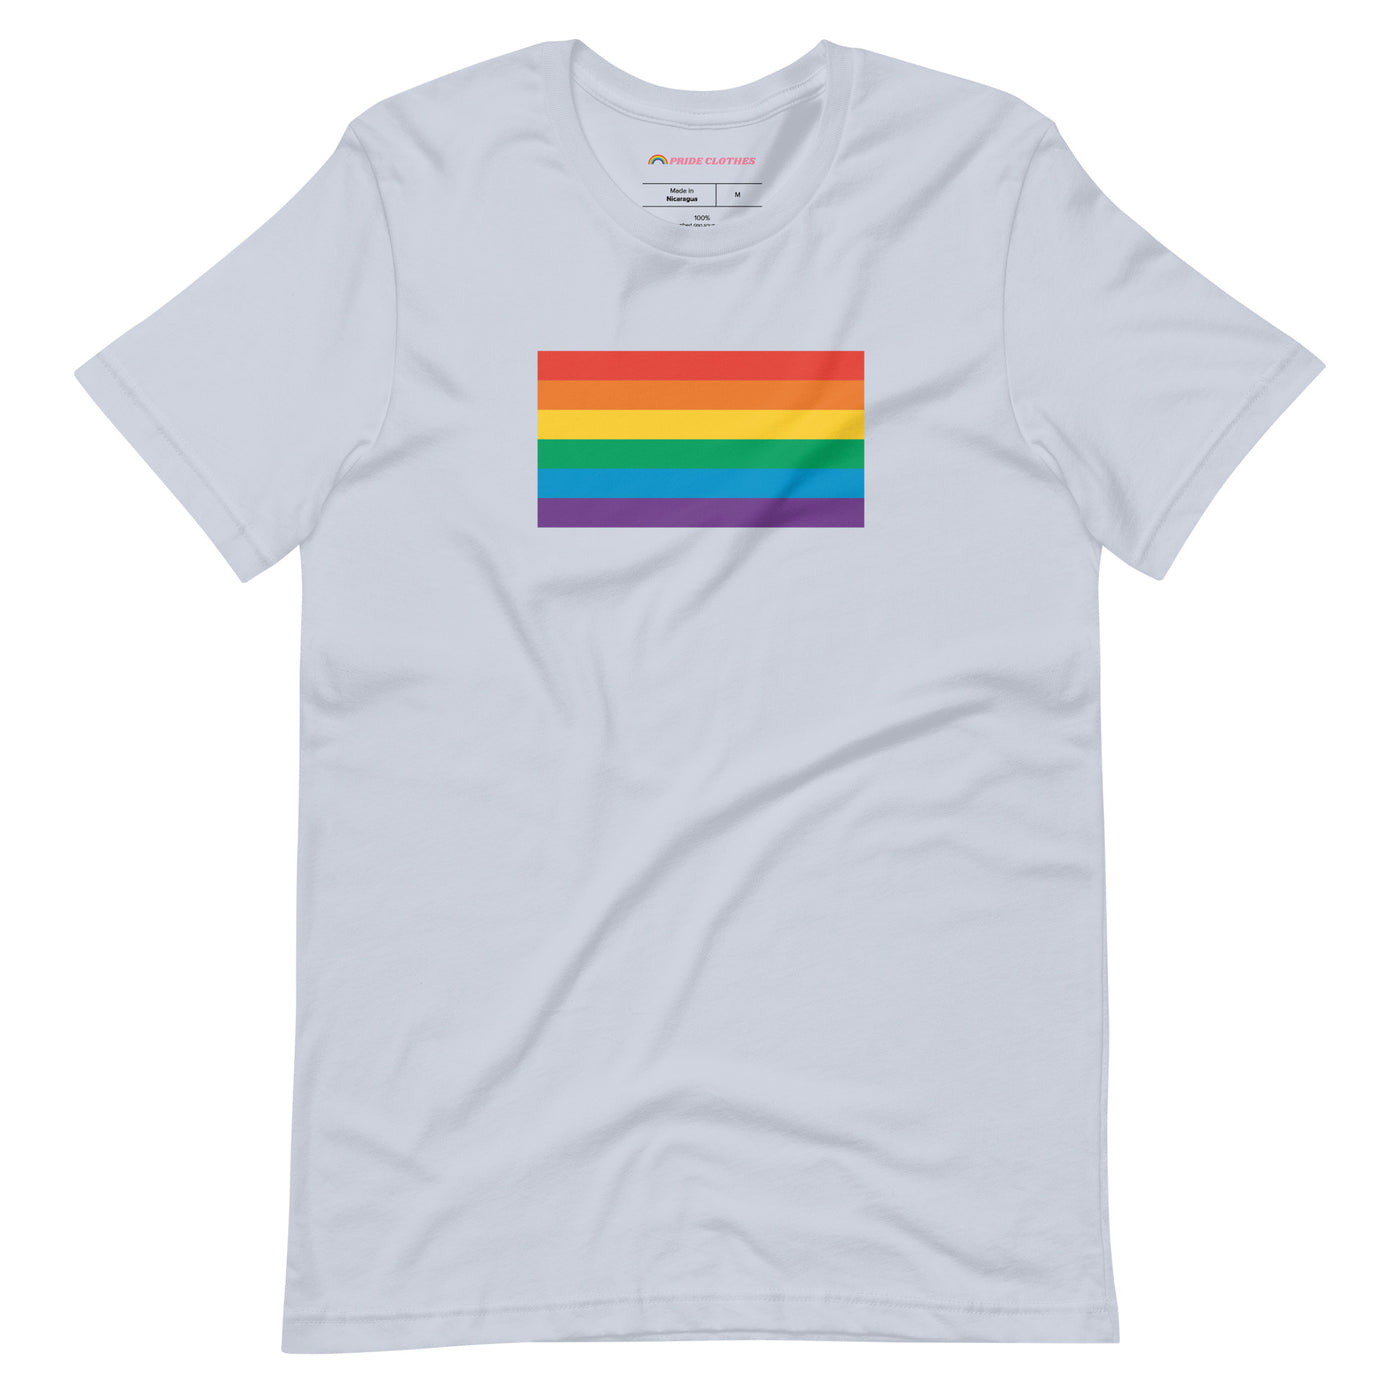 Pride Clothes - The Beautiful Rainbow That Is You LGBTQ Outfits TShirt - Light Blue